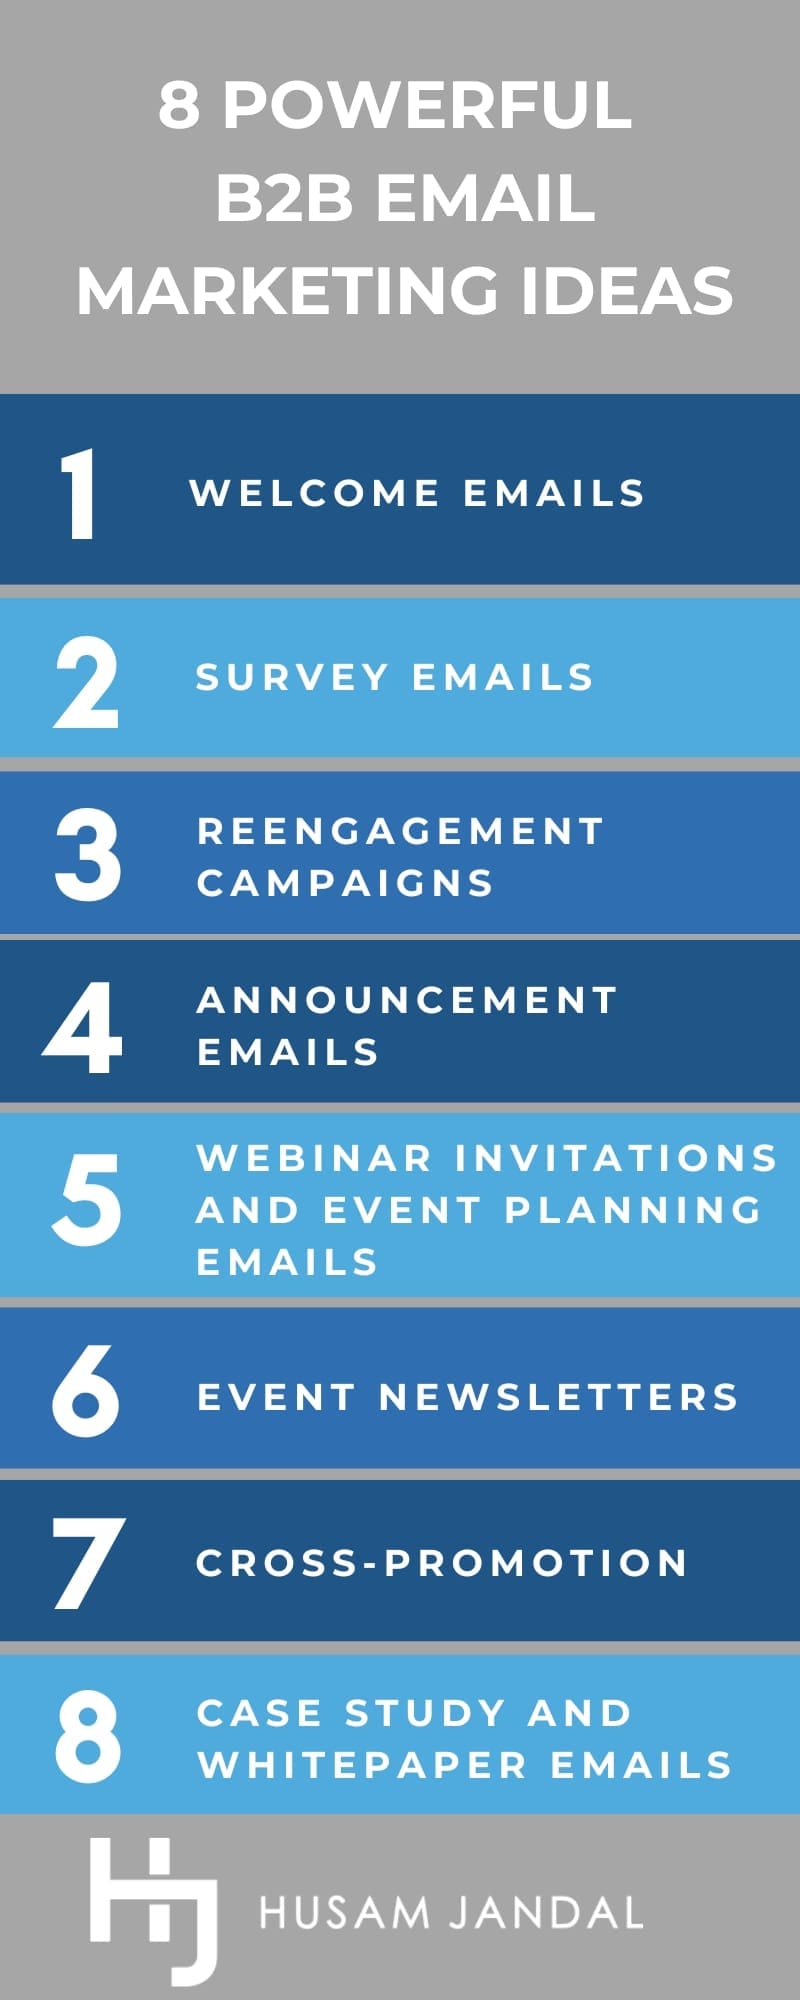 8 Powerful Ideas to Boost Your B2B Email Marketing Strategy